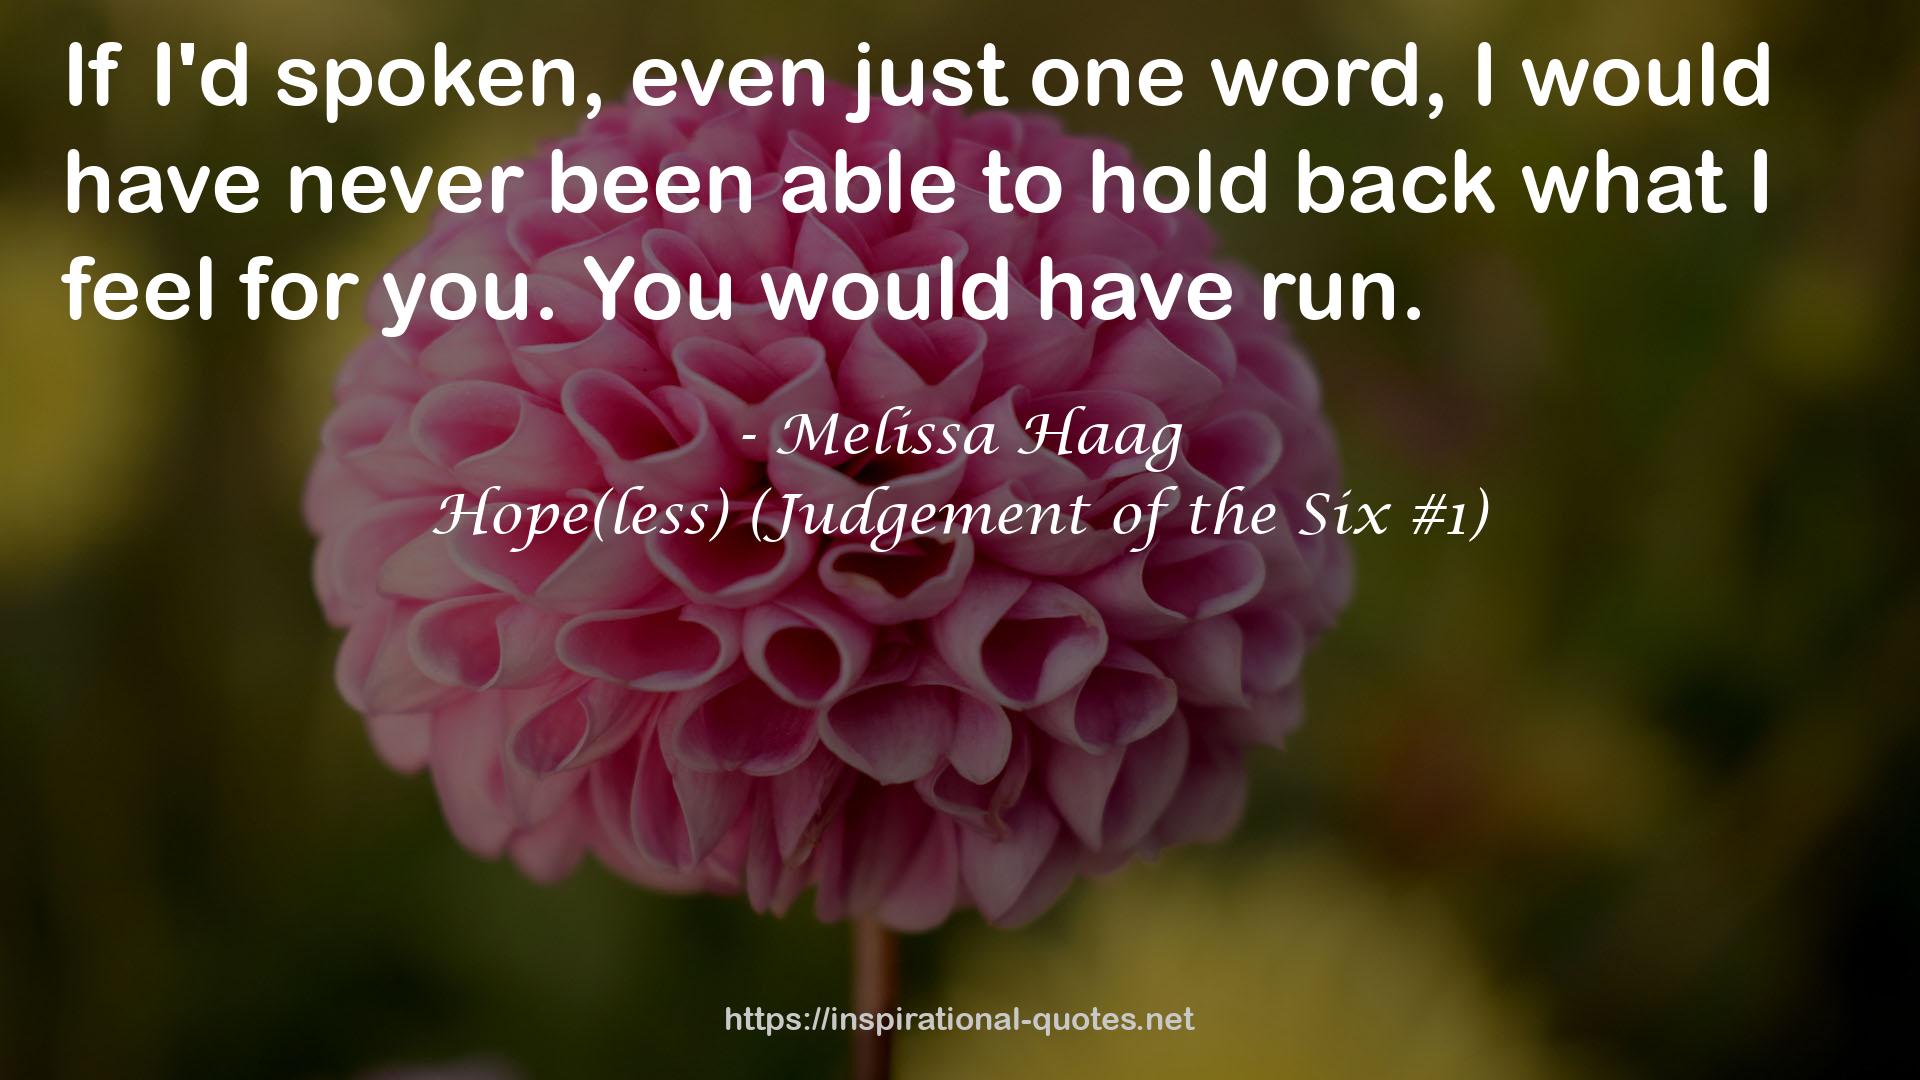 Hope(less) (Judgement of the Six #1) QUOTES